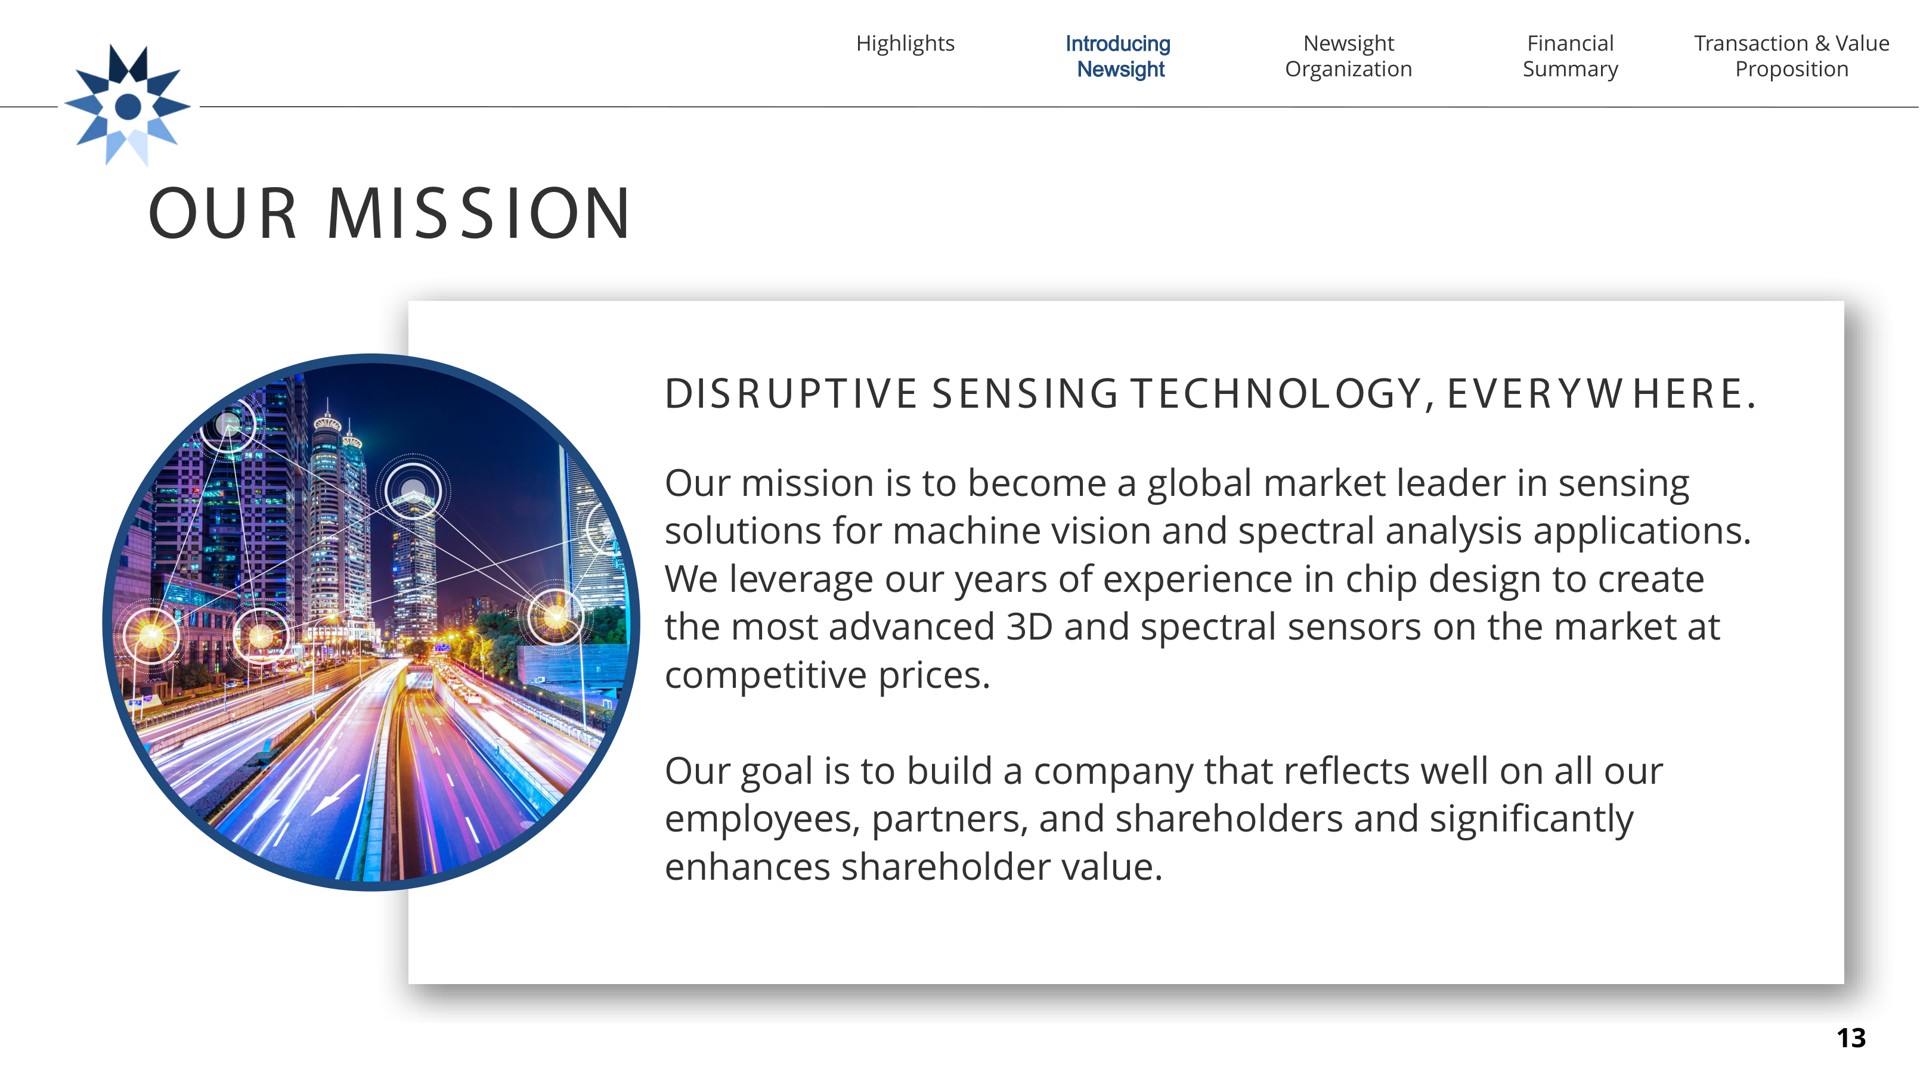 our mis ion dis ing he our mission is to become a global market leader in sensing solutions for machine vision and spectral analysis applications we leverage our years of experience in chip design to create the most advanced and spectral sensors on the market at competitive prices our goal is to build a company that reflects well on all our employees partners and shareholders and significantly enhances shareholder value disruptive technology everywhere | Newsight Imaging